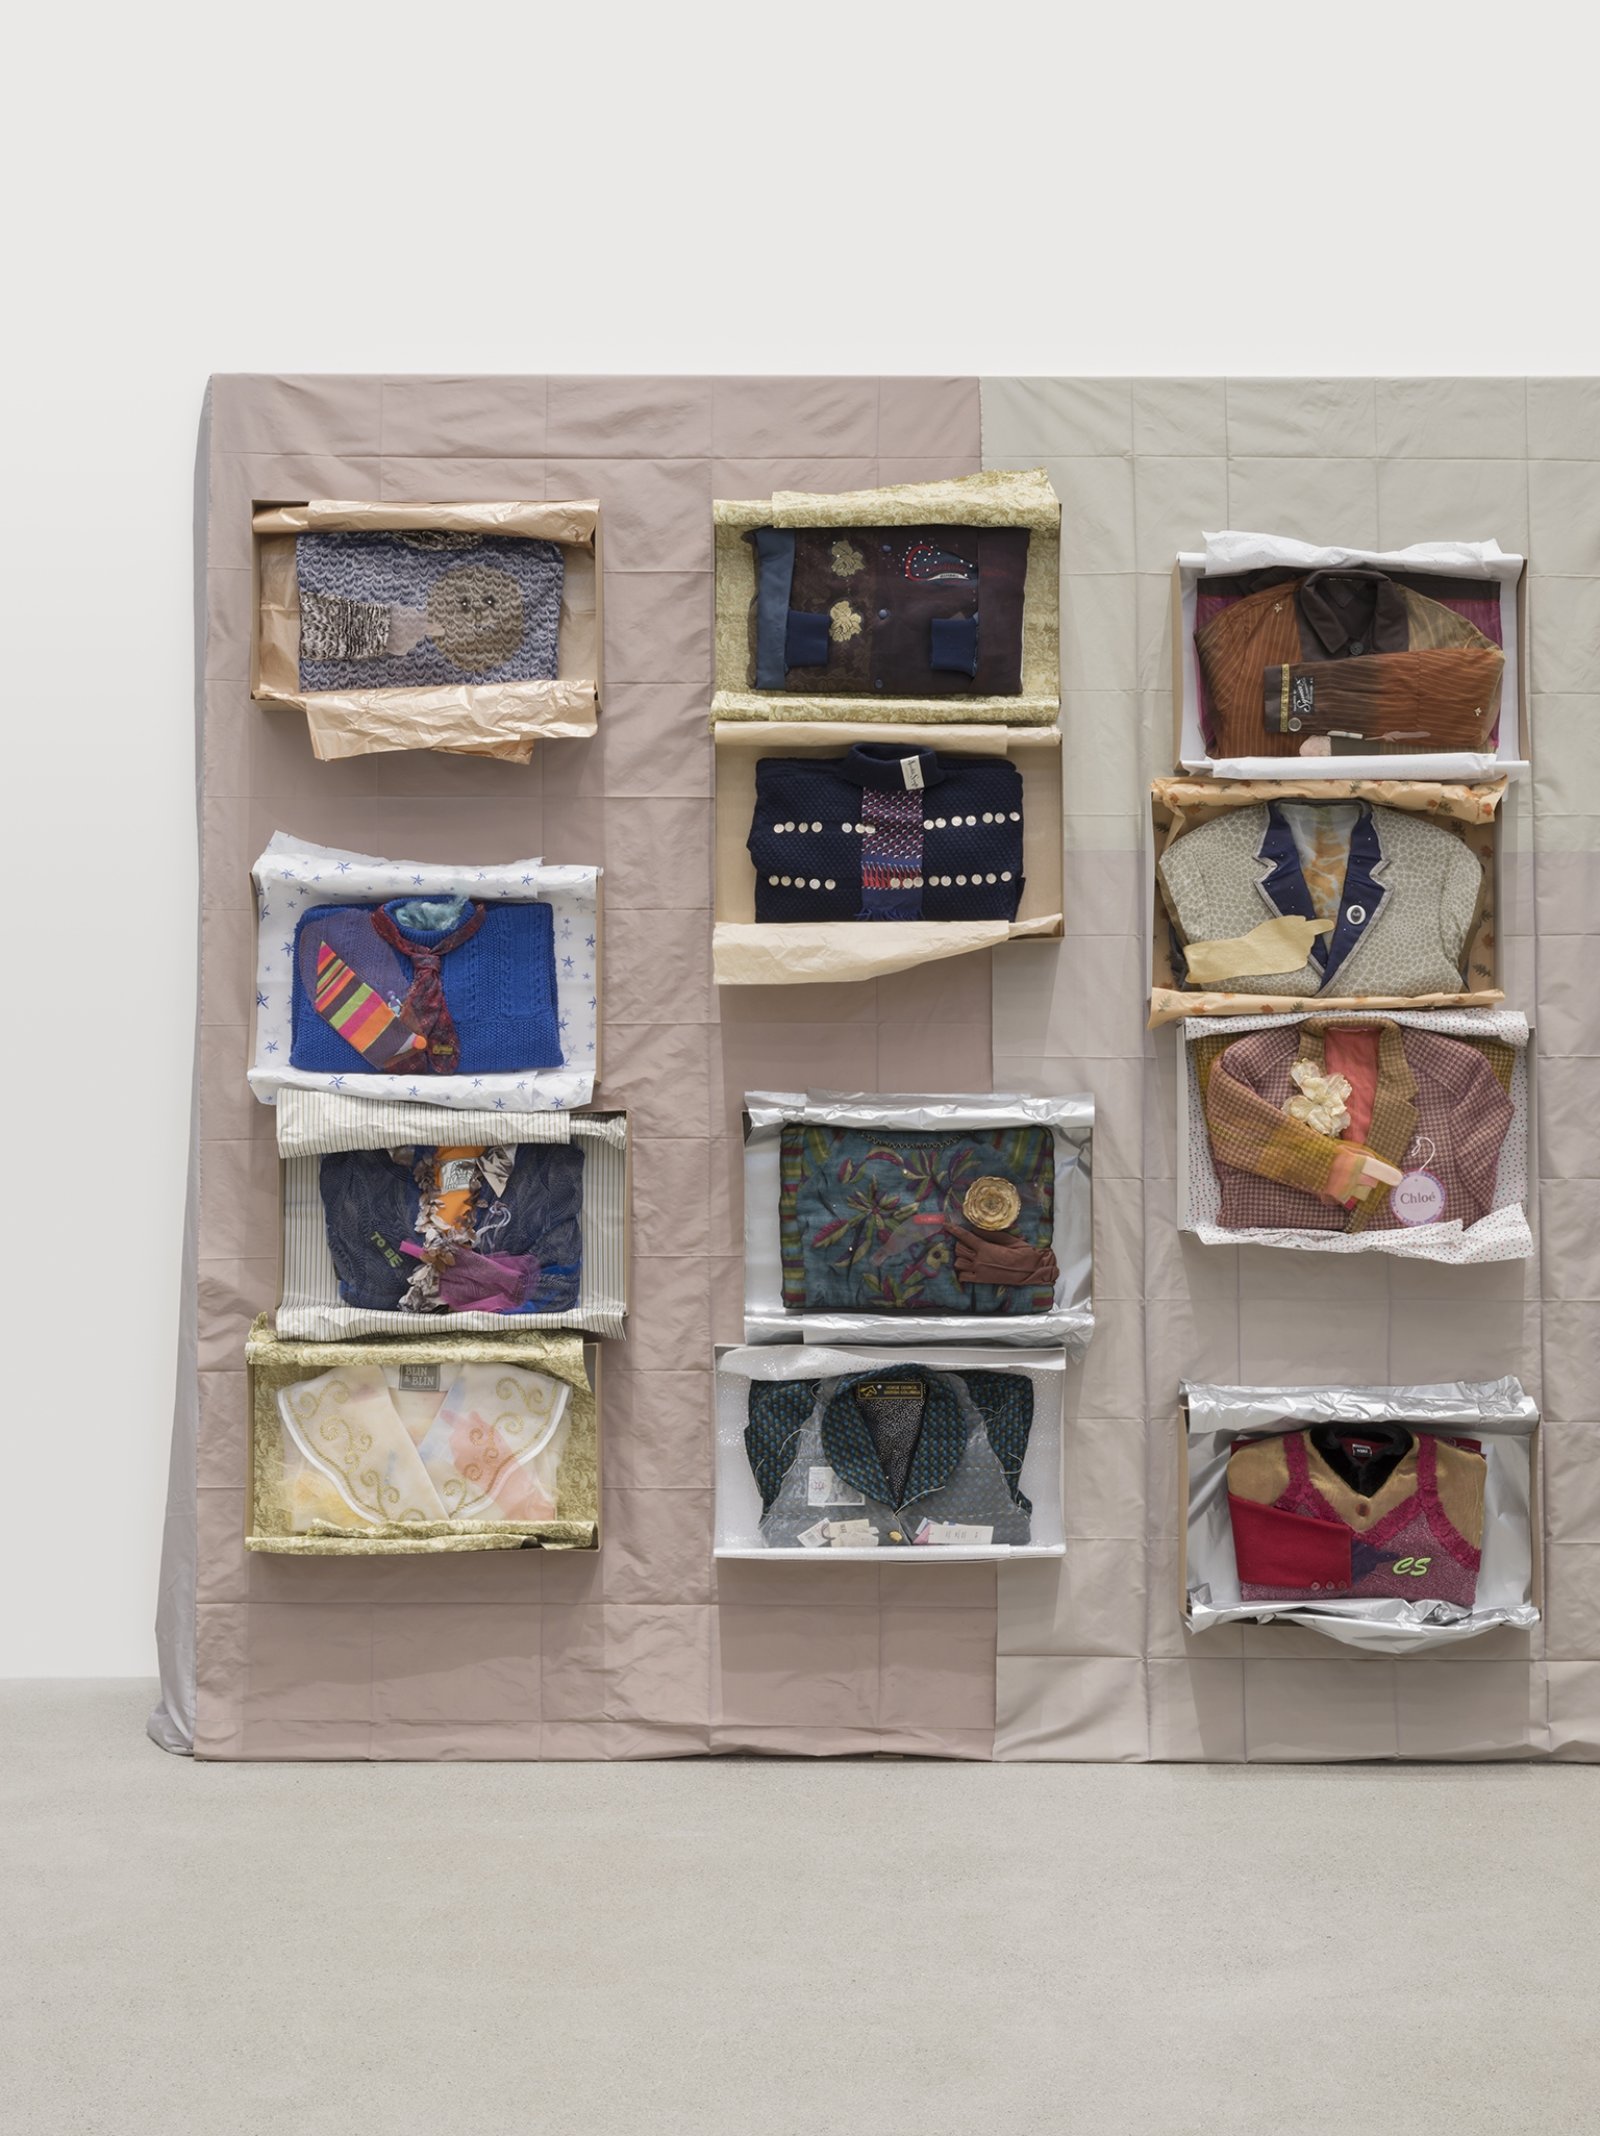 Liz Magor, Being This (detail), 2012–2019, paper, textiles, found materials, 96 x 432 x 22 in. (244 x 1097 x 56 cm)